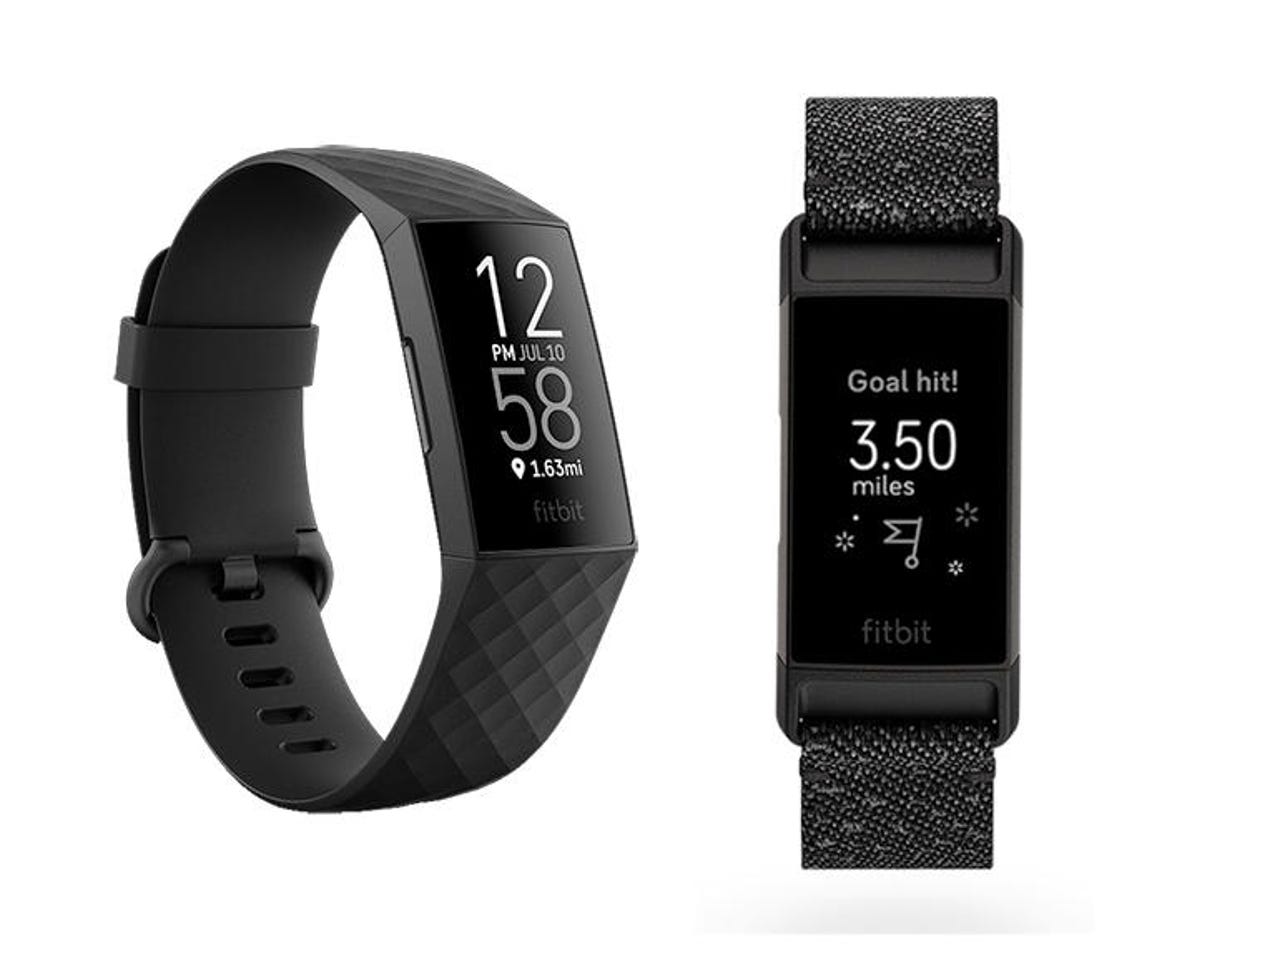 Fitbit long-term test: Good features, but battery life with GPS is an issue | ZDNET